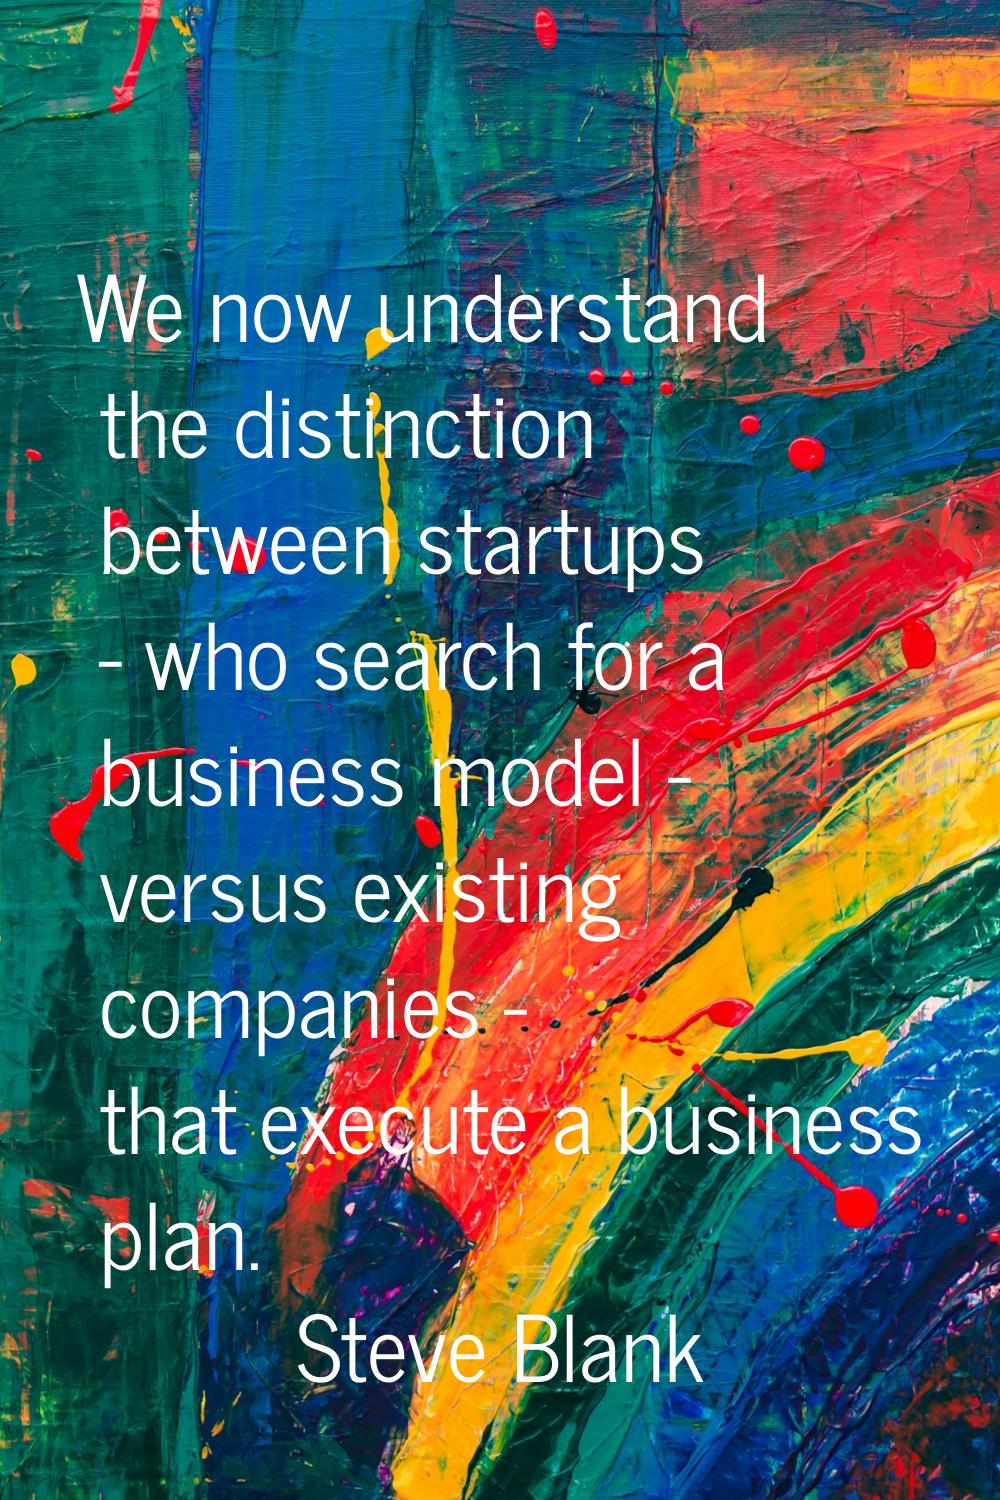 We now understand the distinction between startups - who search for a business model - versus exist